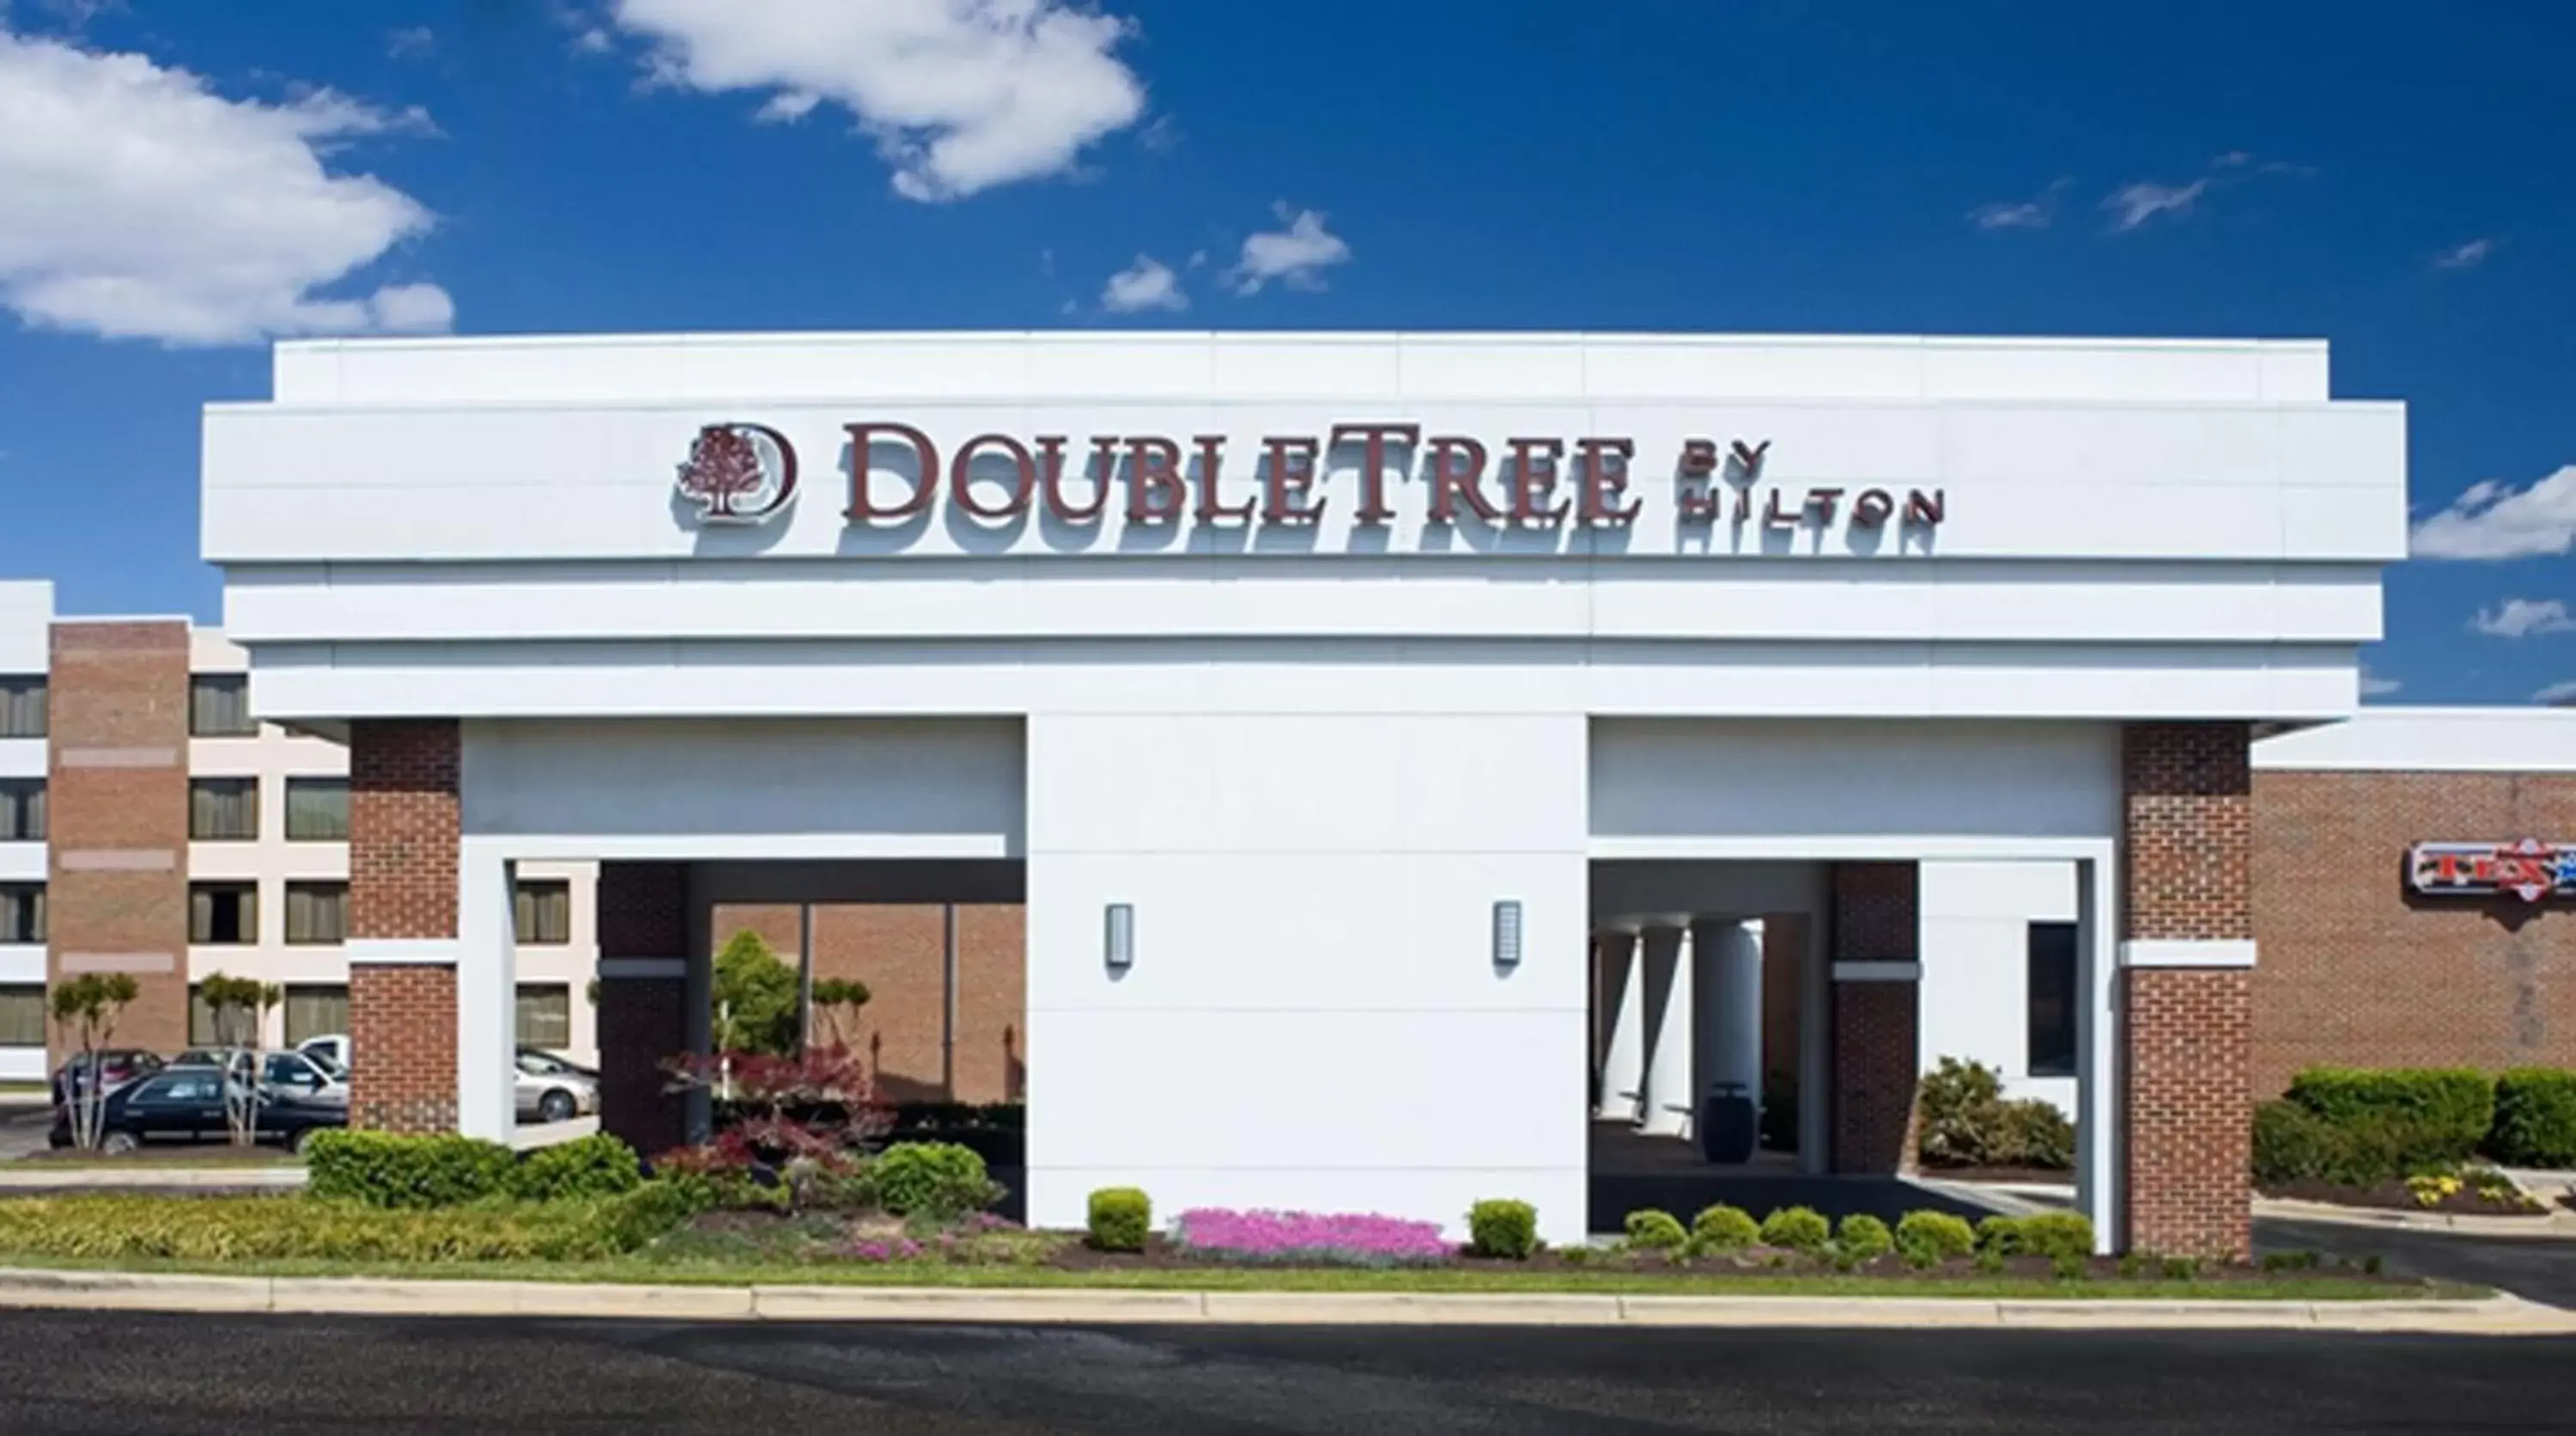 Property Building in DoubleTree by Hilton Rocky Mount